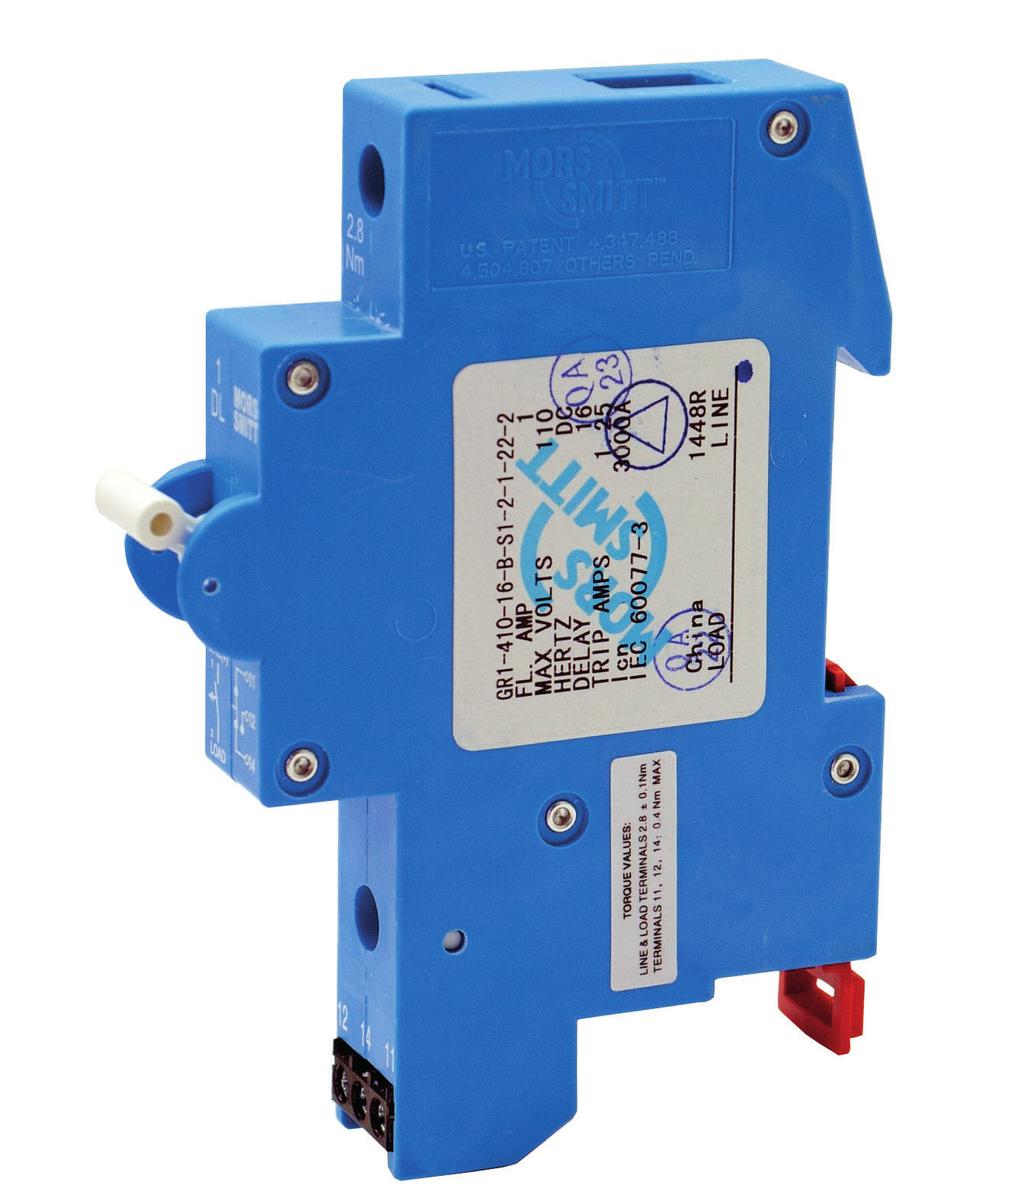 GR circuit breaker - hydraulic magnetic, Datasheet railway, 35 mm rail Description Compact hydraulic magnetic circuit breaker for railway applications, to protect electronic equipment and components